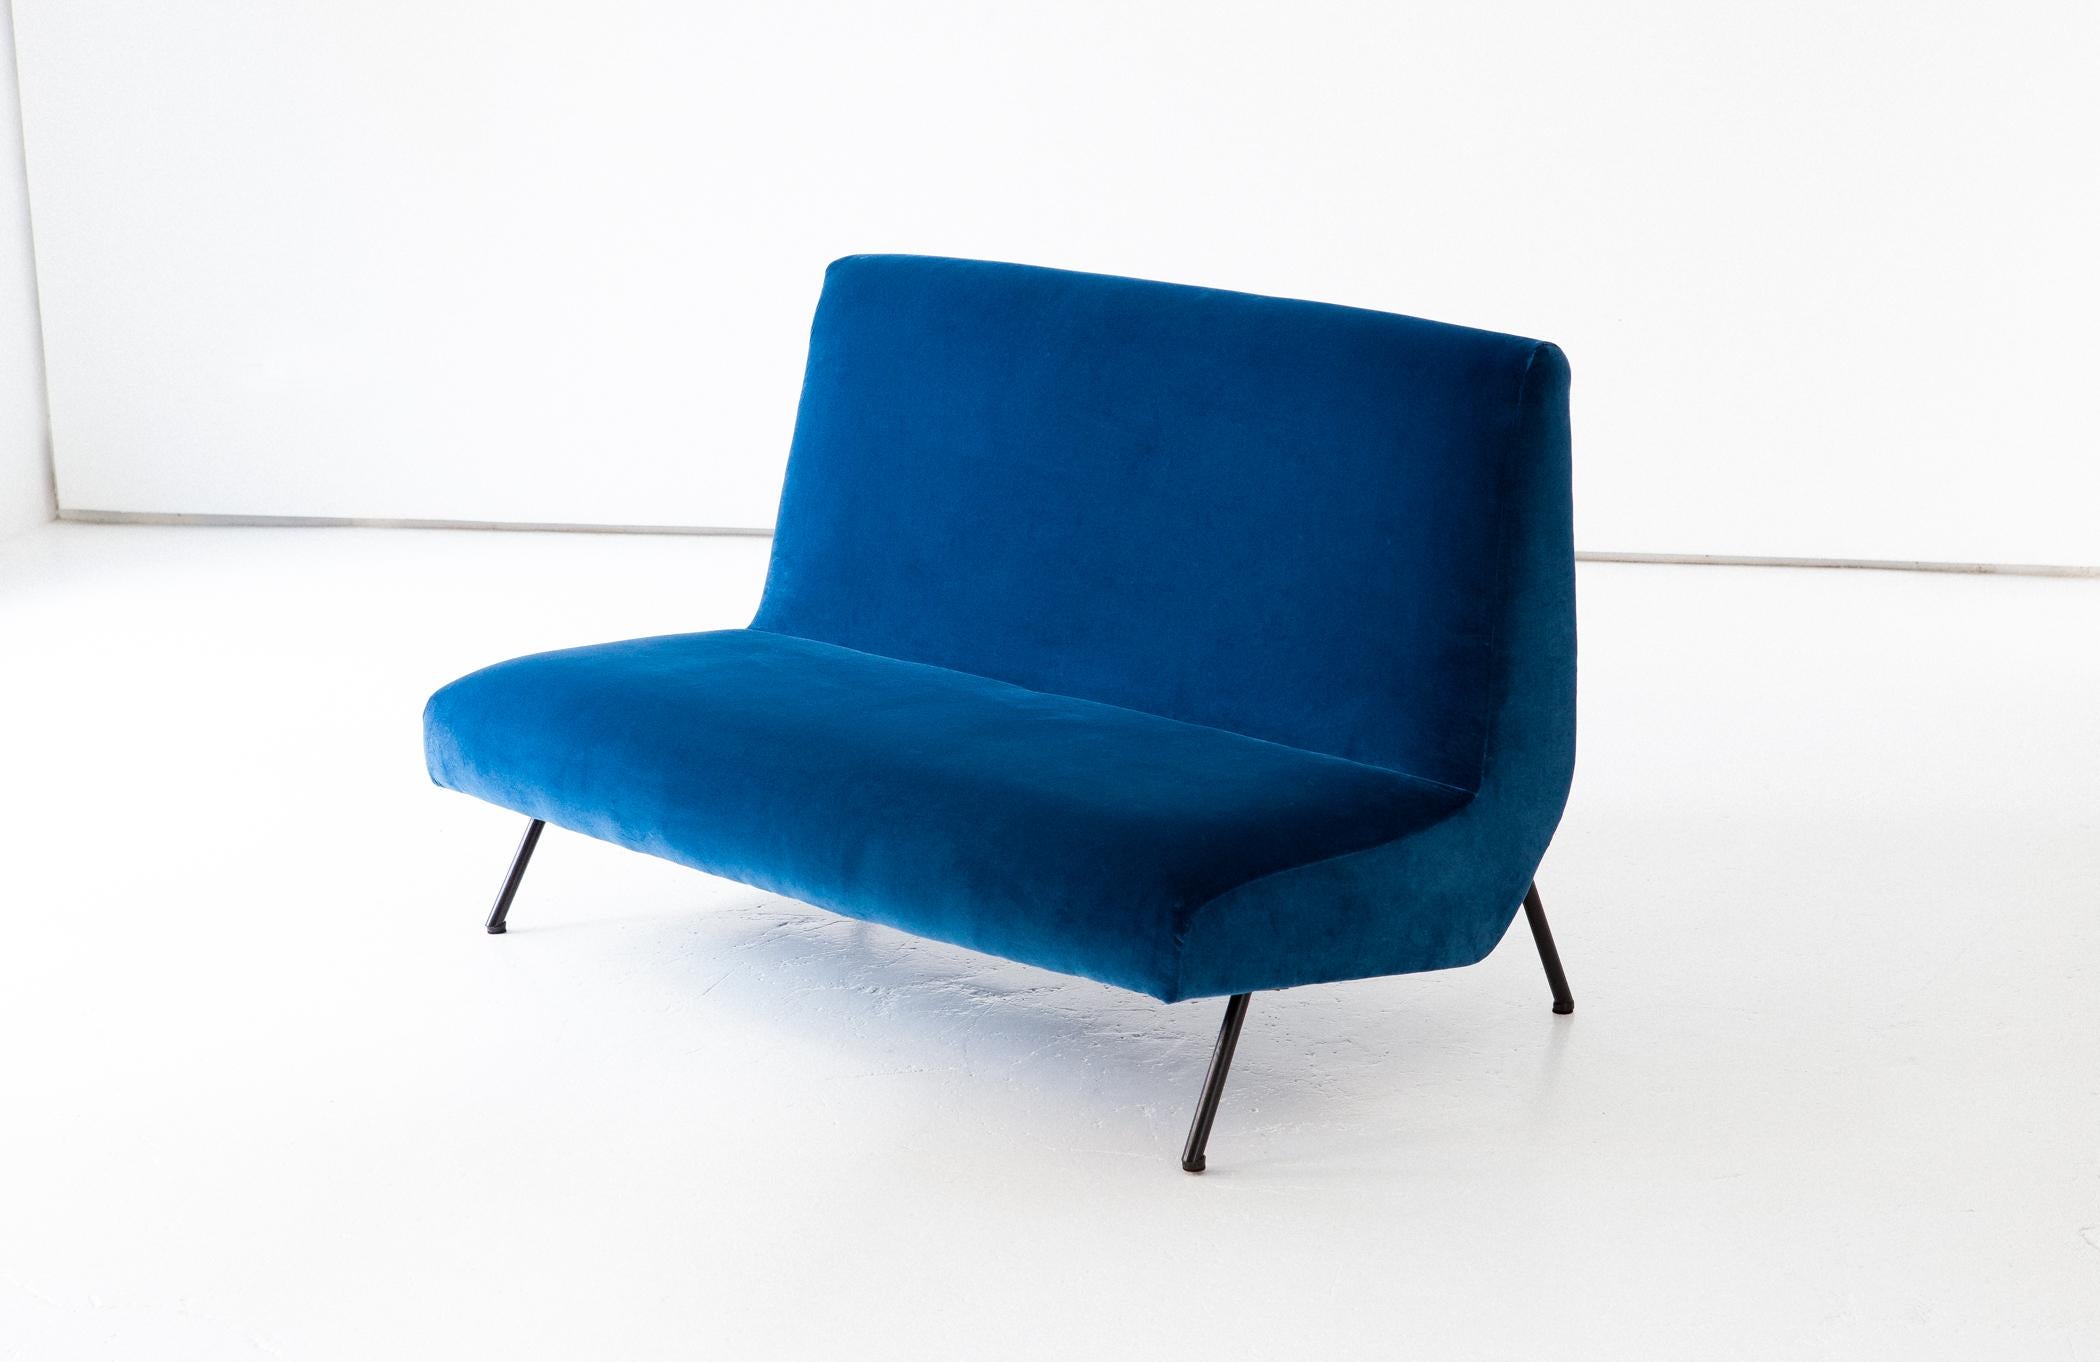 Mid-Century Modern sofa, designed and produced in Italy during the 1950s.

The upholstery is new with high quality 100% cotton blue velvet, we have also worked on the iron legs with new black enamel.
We consider that the seat is very